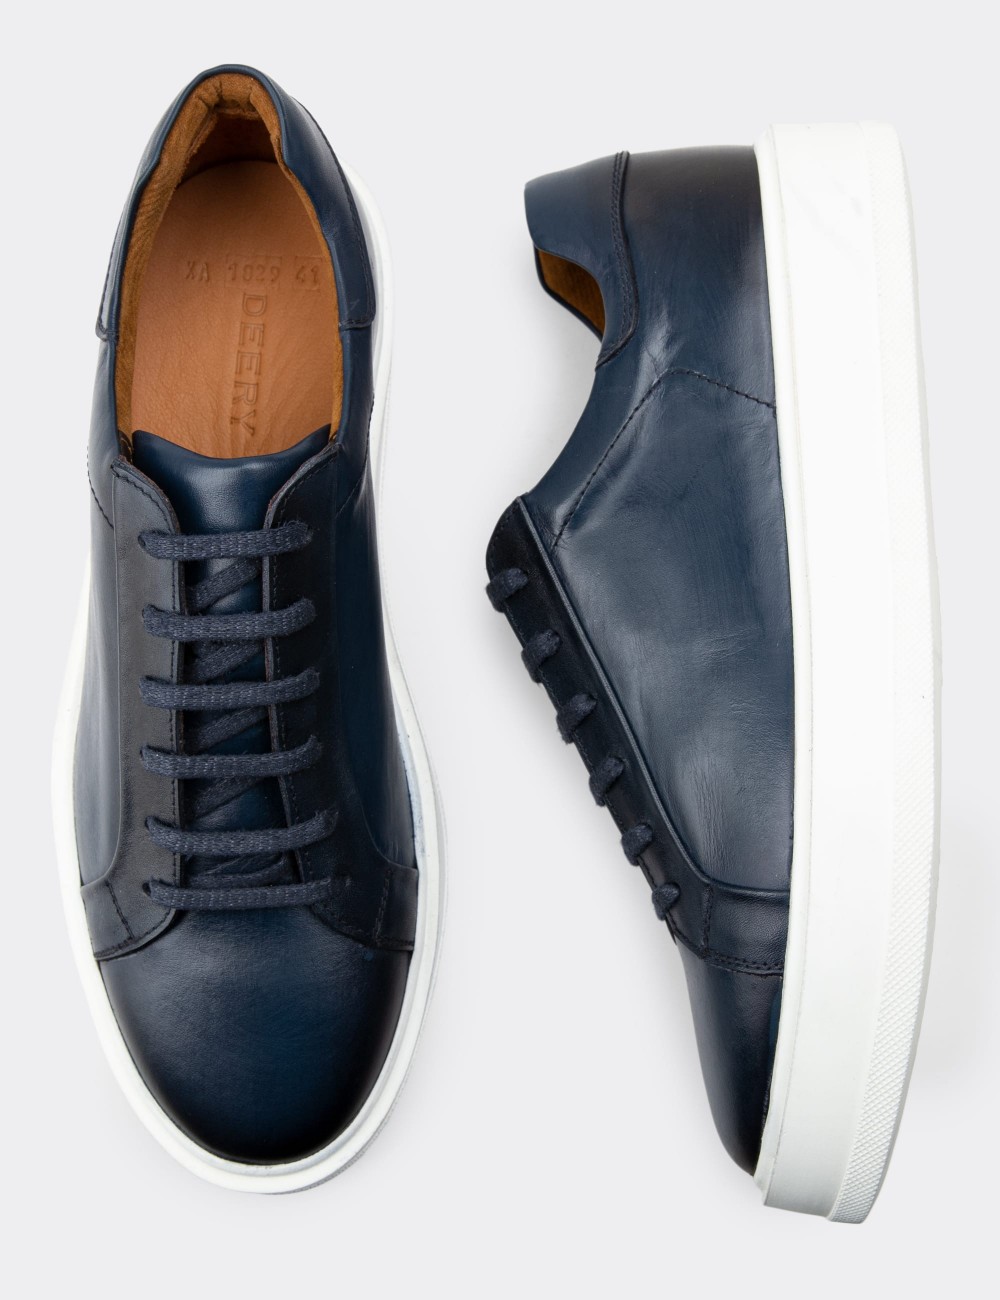 Navy Leather Sneakers - 01829MLCVP01